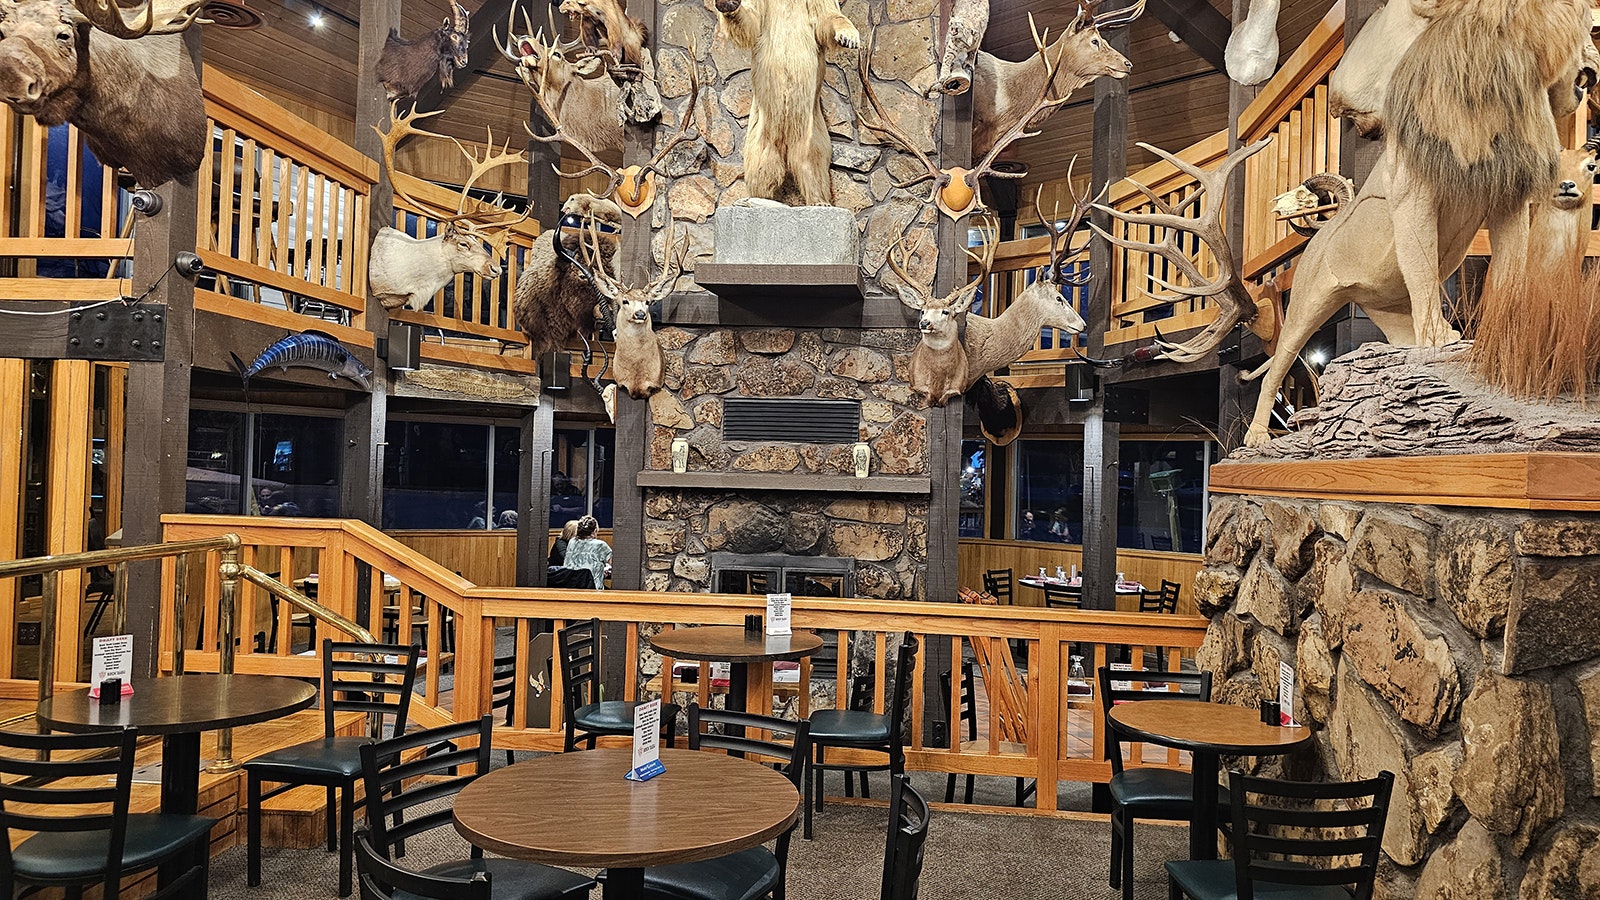 The Safari Restaurant has a large collection of wild game trophies. Workers at the restaurant said their understanding is the trophies will be staying.